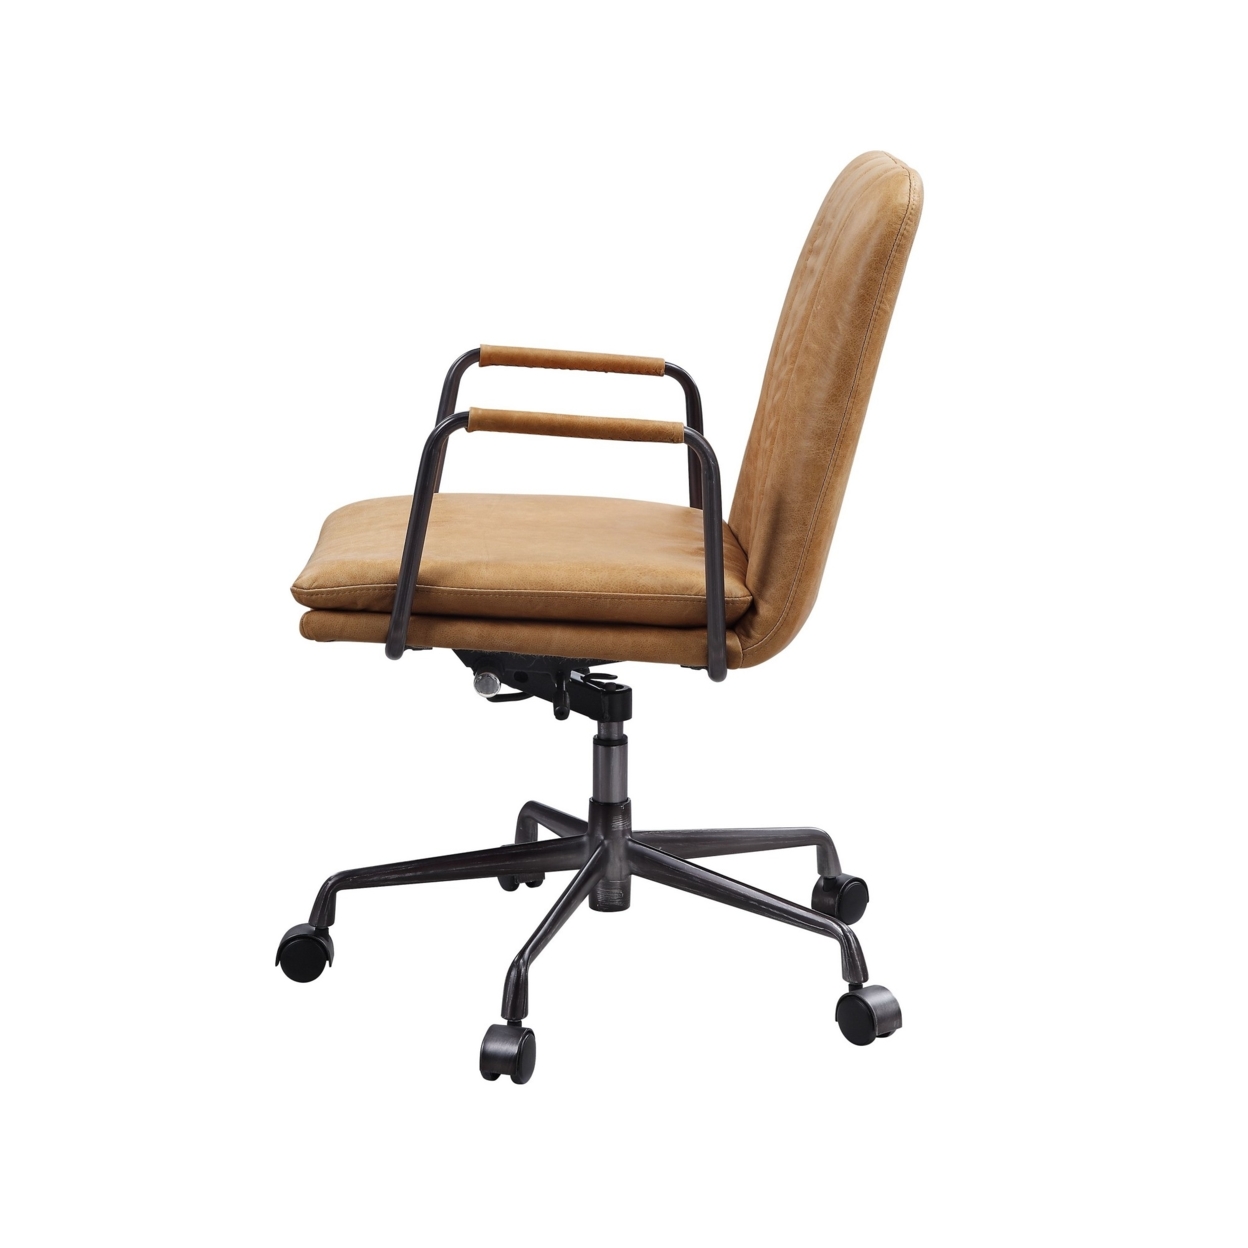 Office Chair With Channel Tufting, Rum And Black- Saltoro Sherpi